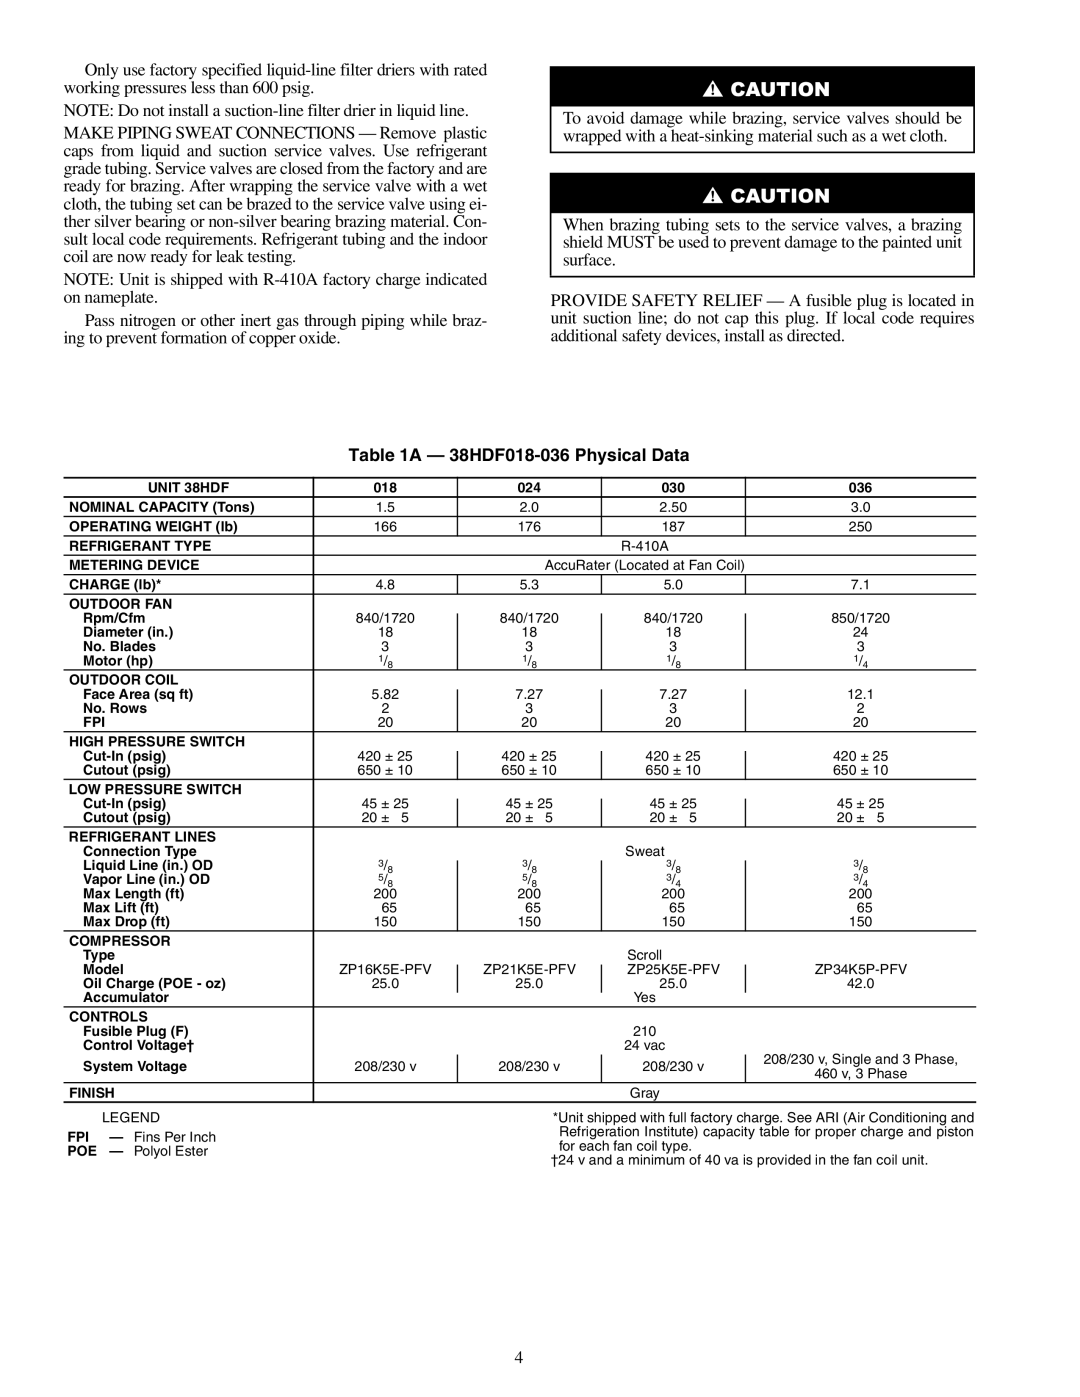 Carrier 38HDR018-060 specifications A - 38HDF018-036Physical Data 